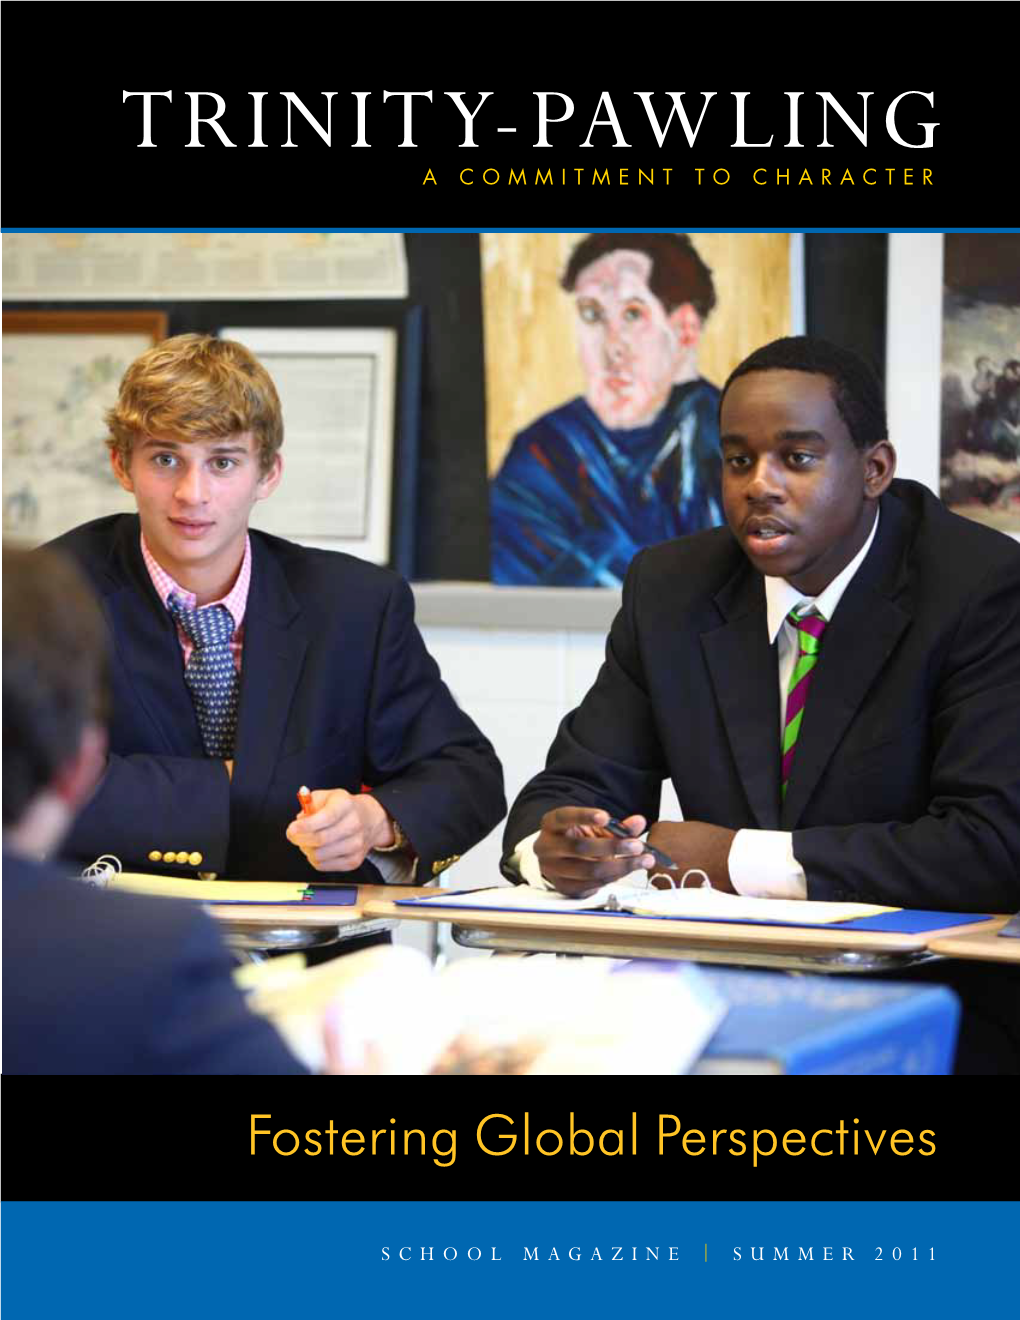 Fostering Global Perspectives